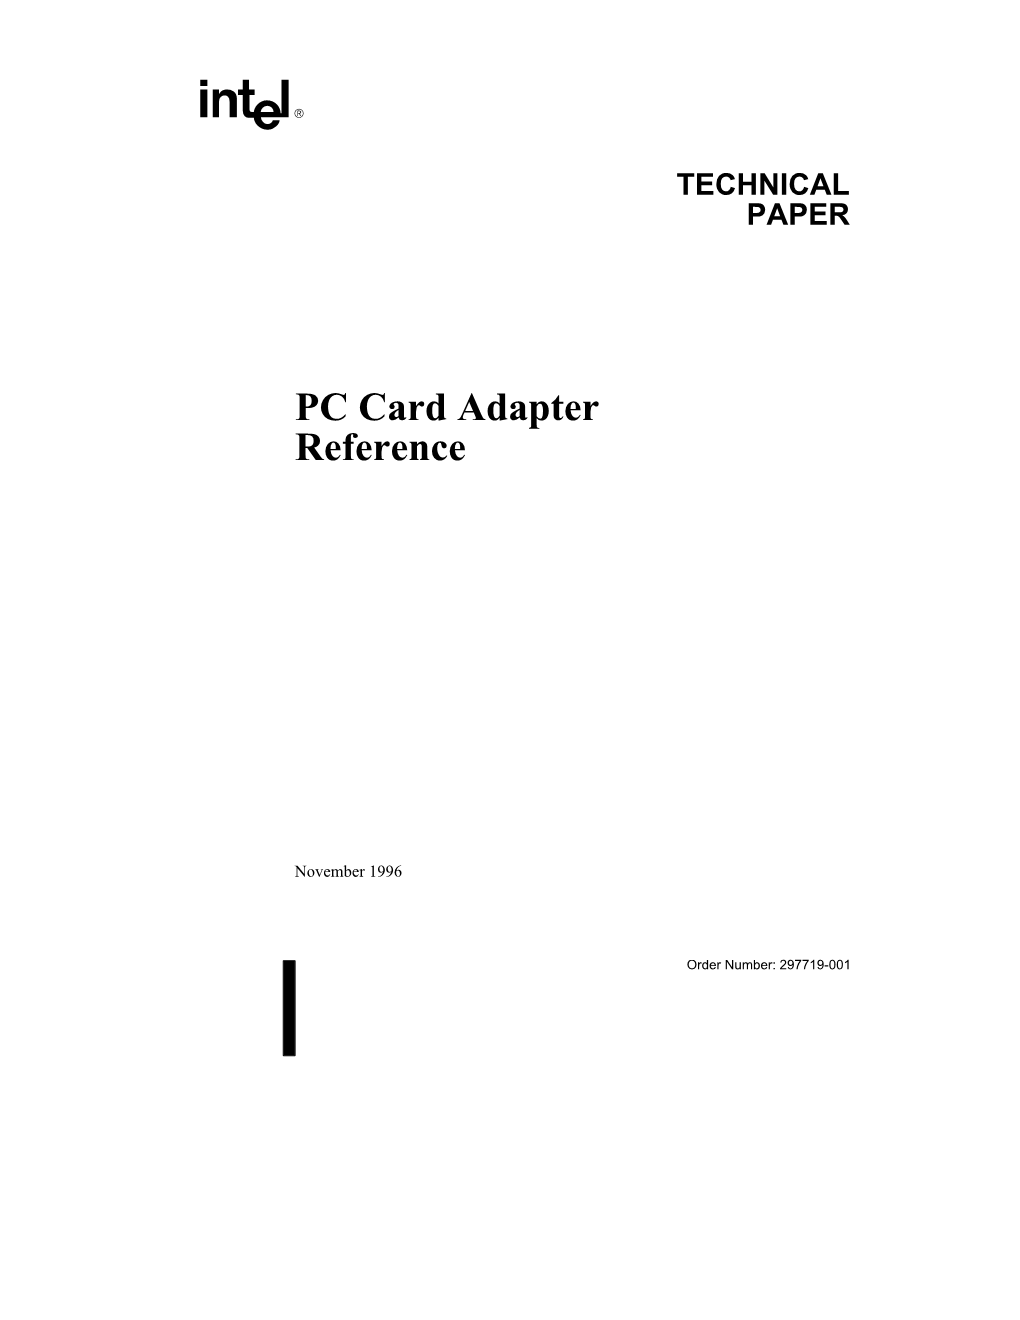 PC Card Adapter Reference